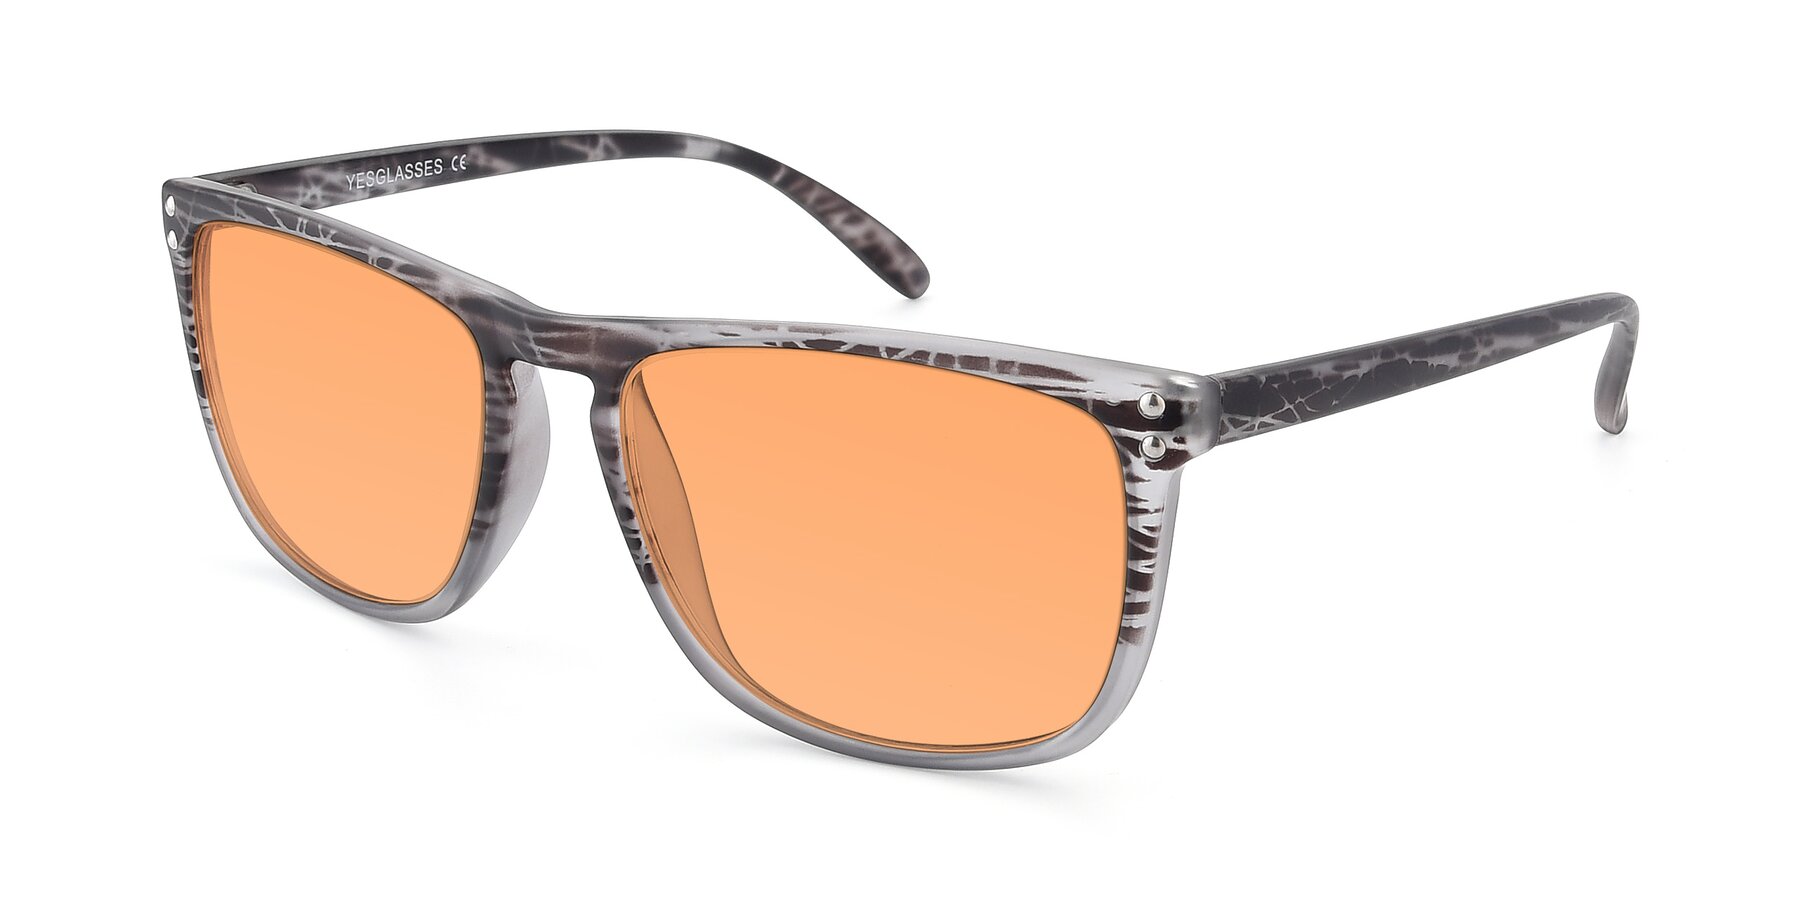 Angle of SSR411 in Translucent Floral Grey with Medium Orange Tinted Lenses